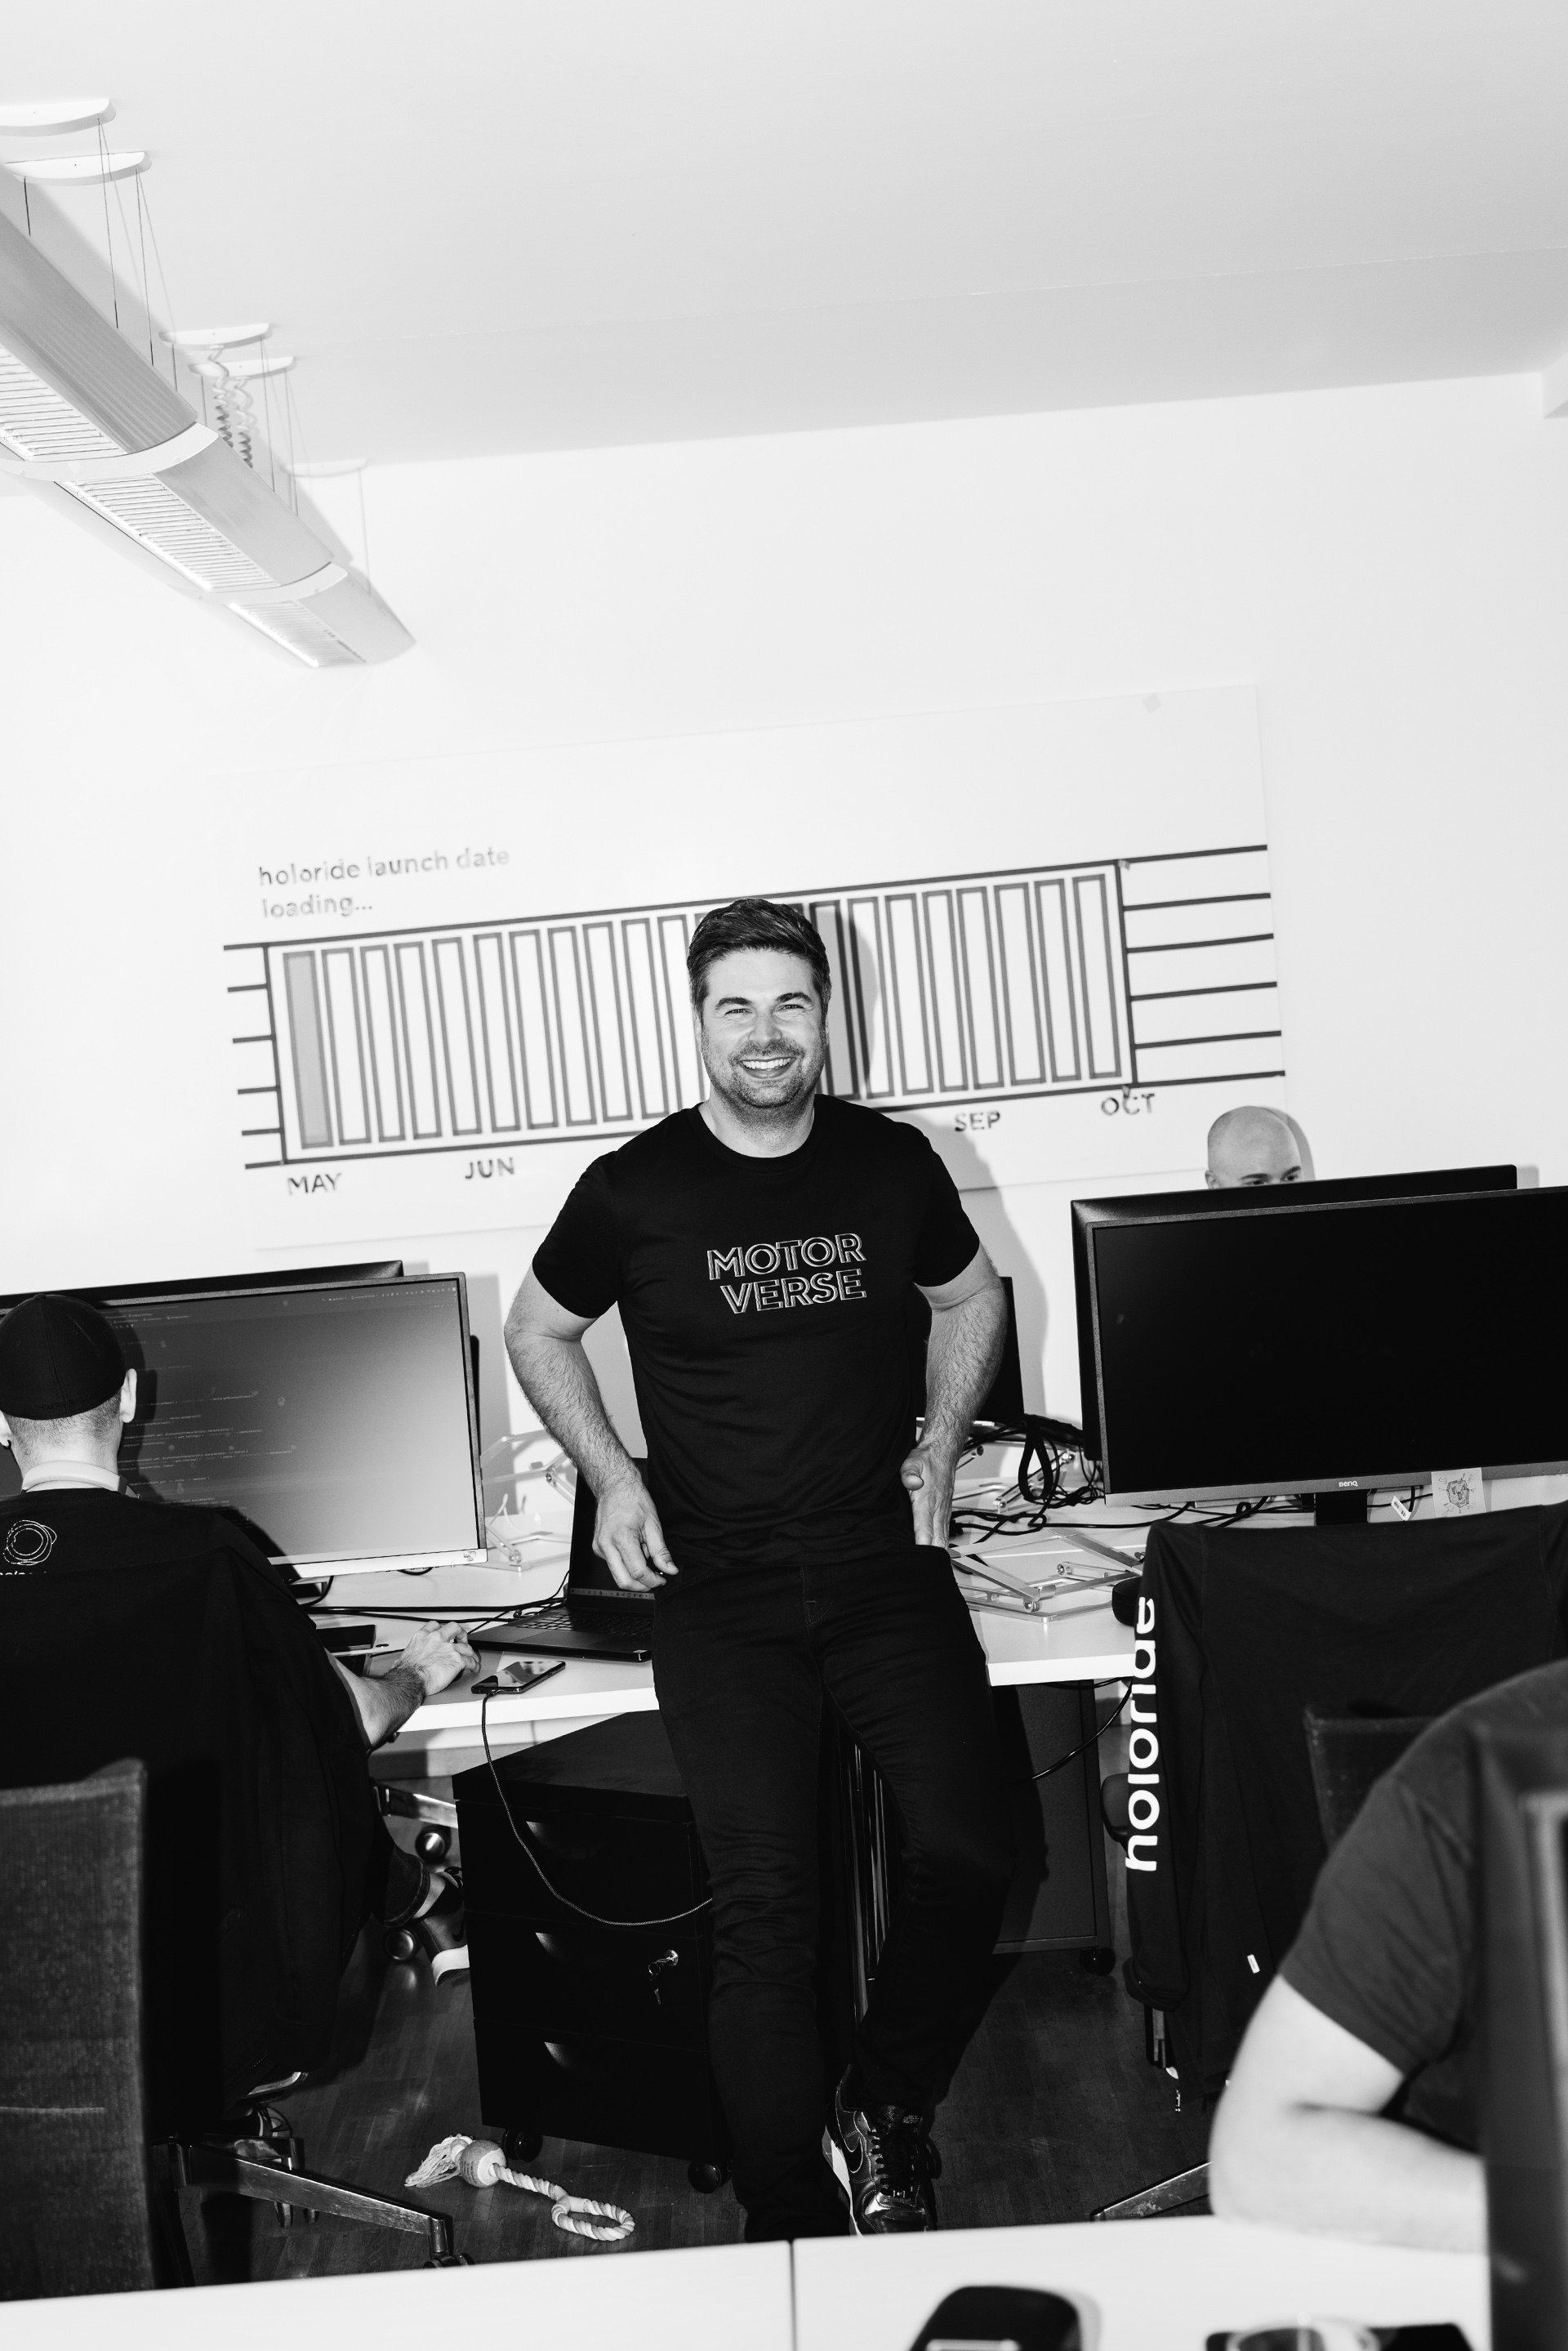 Nils Wollny standing at his desk surrounded by his team. His T-shirt reads "Motor Verse".